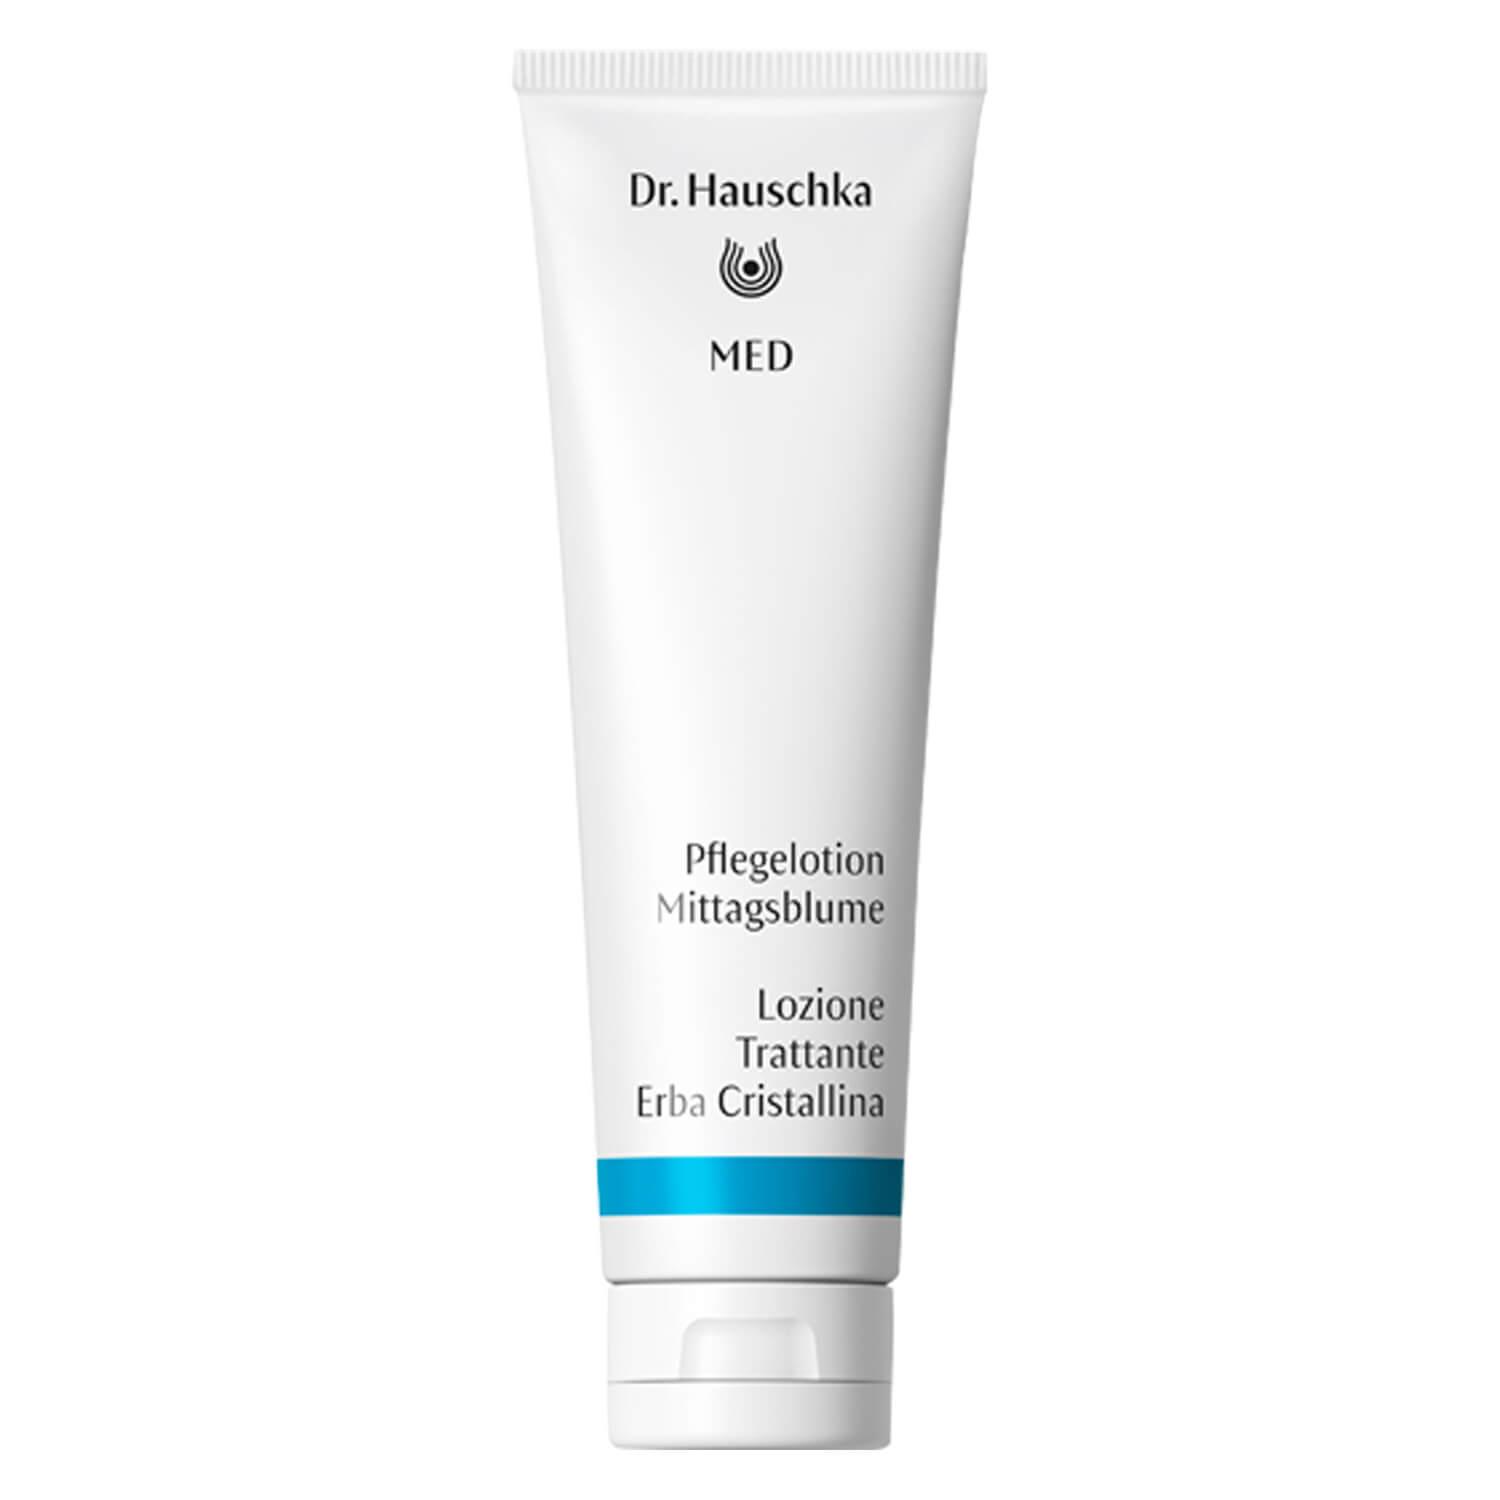 Dr. Hauschka MED Ice Plant Body Care Lotion